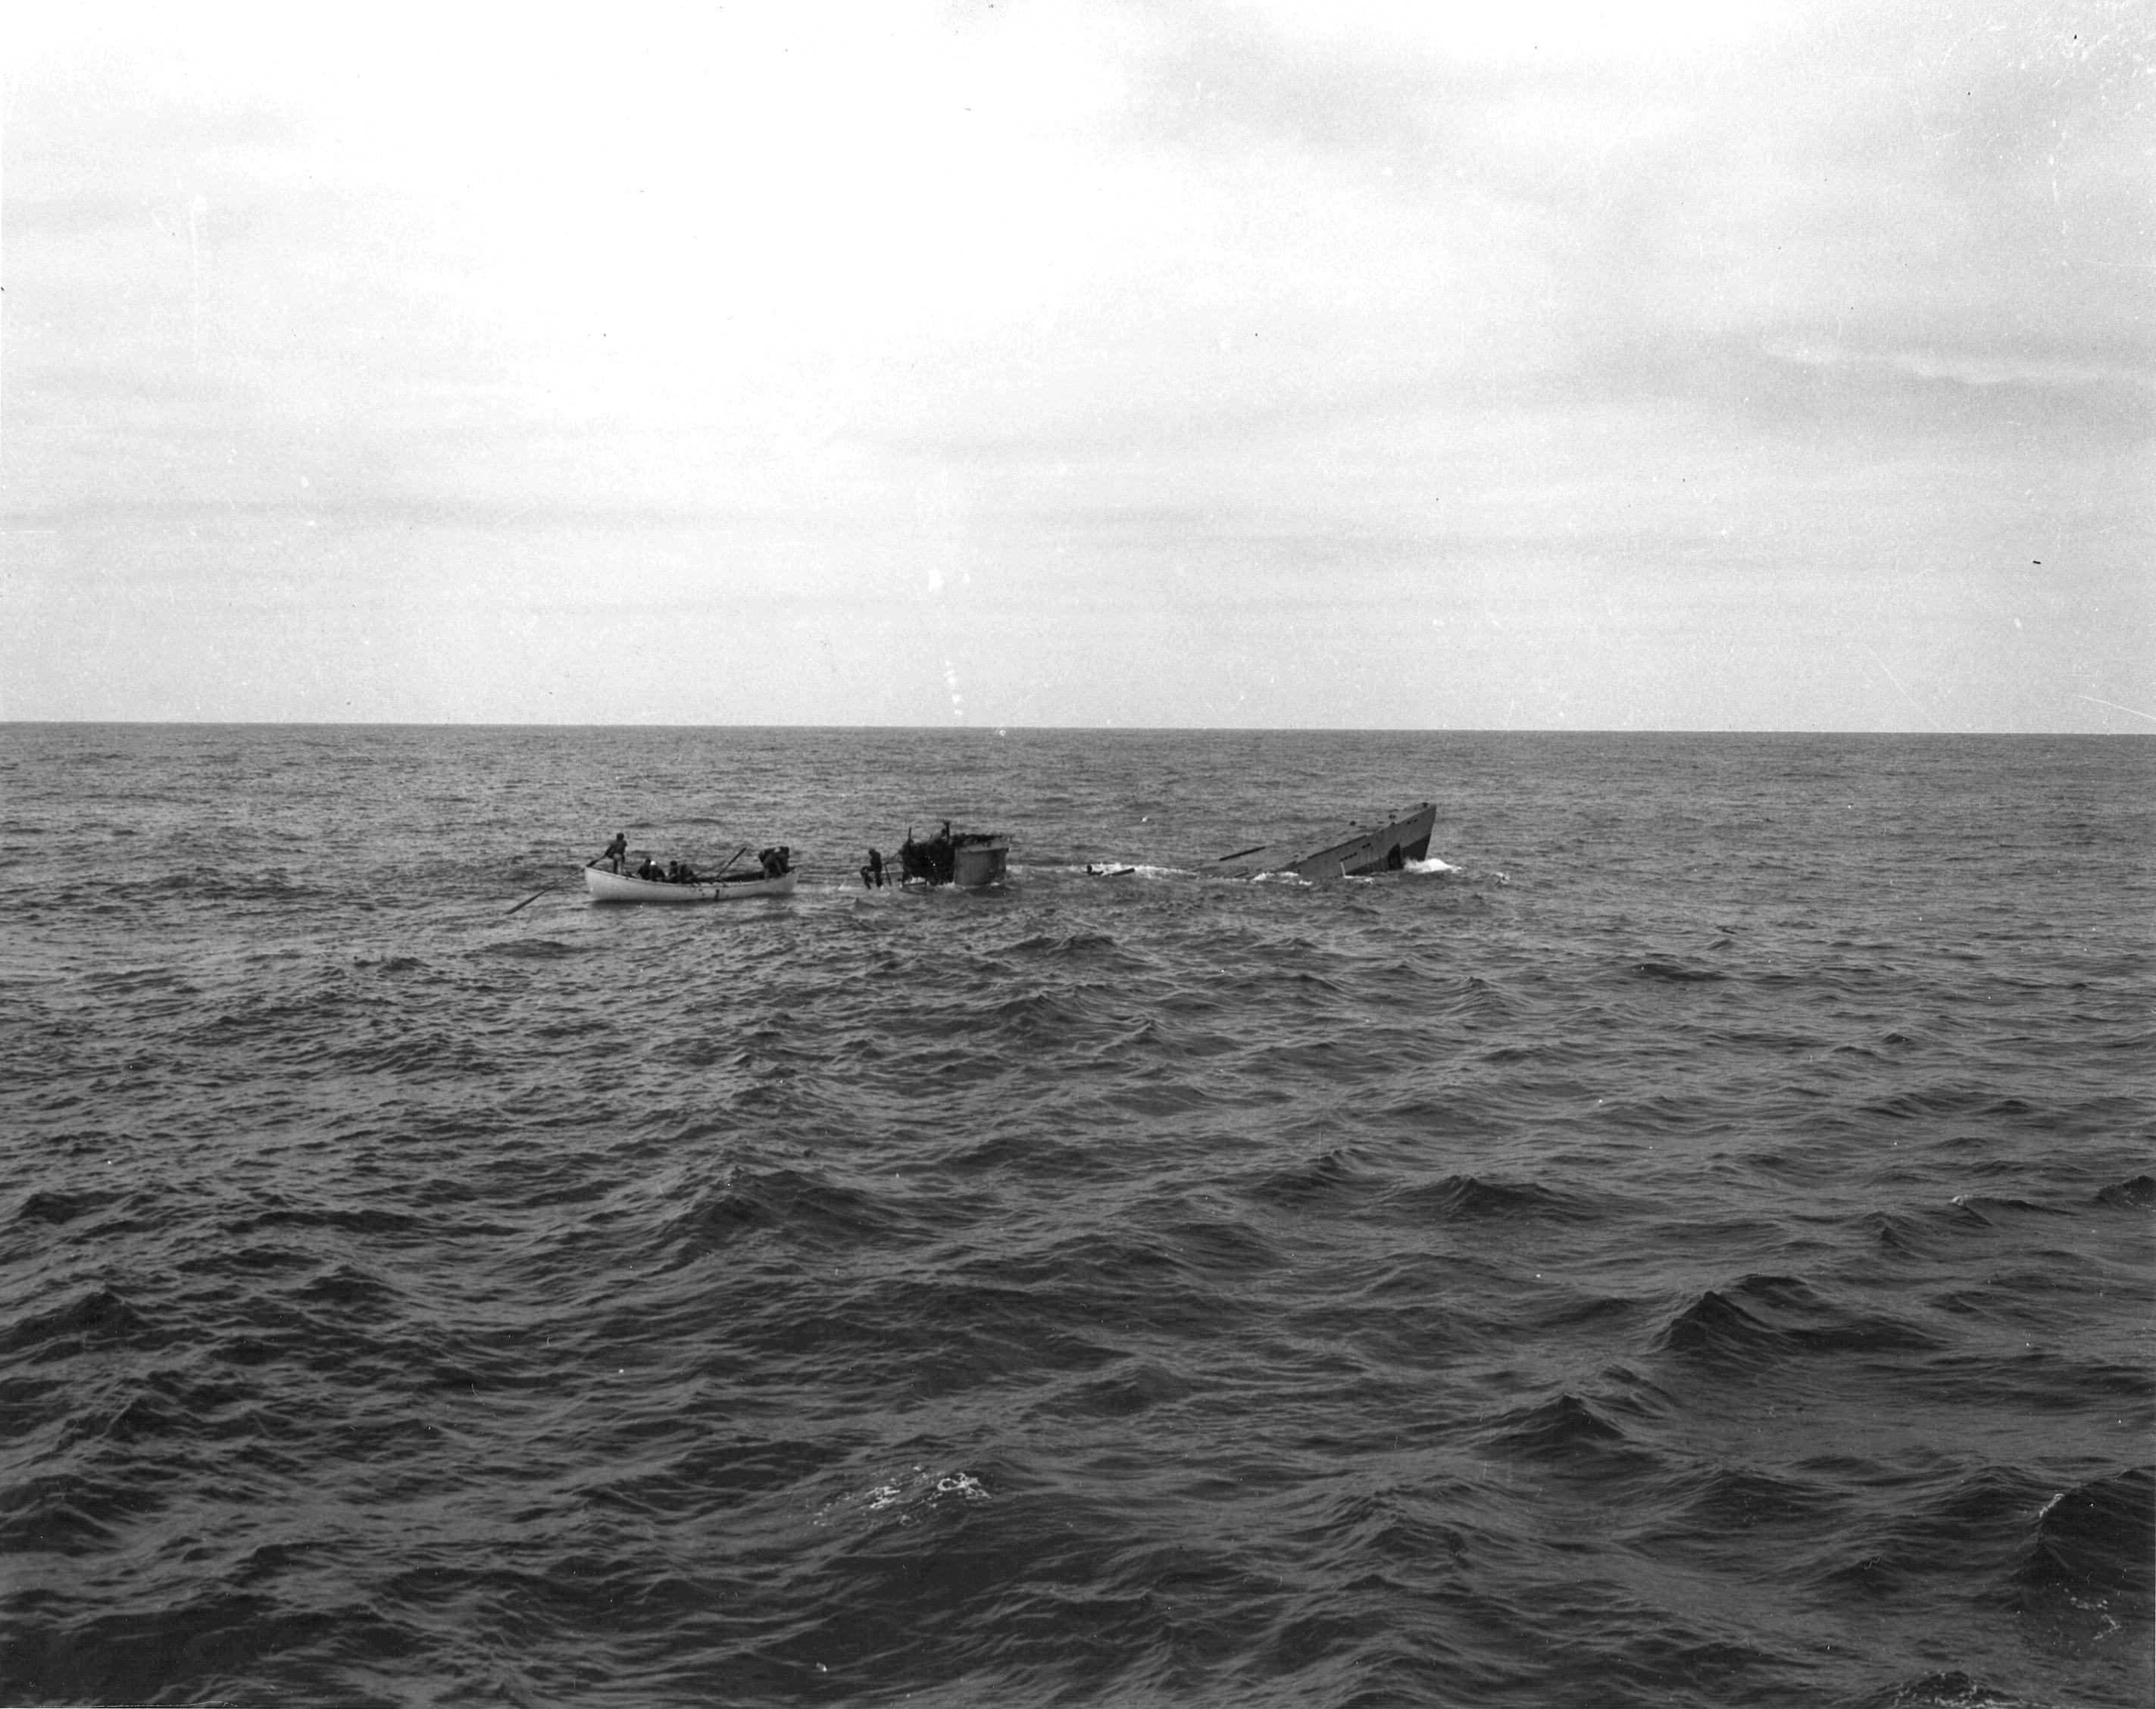 Boarding party from Coast Guard cutter Spencer approaching the U-175 after the sub was forced to the surface by depth charges, North Atlantic, 500 nautical miles WSW of Ireland, 17 Apr 1943. Minutes later, U-175 sank.